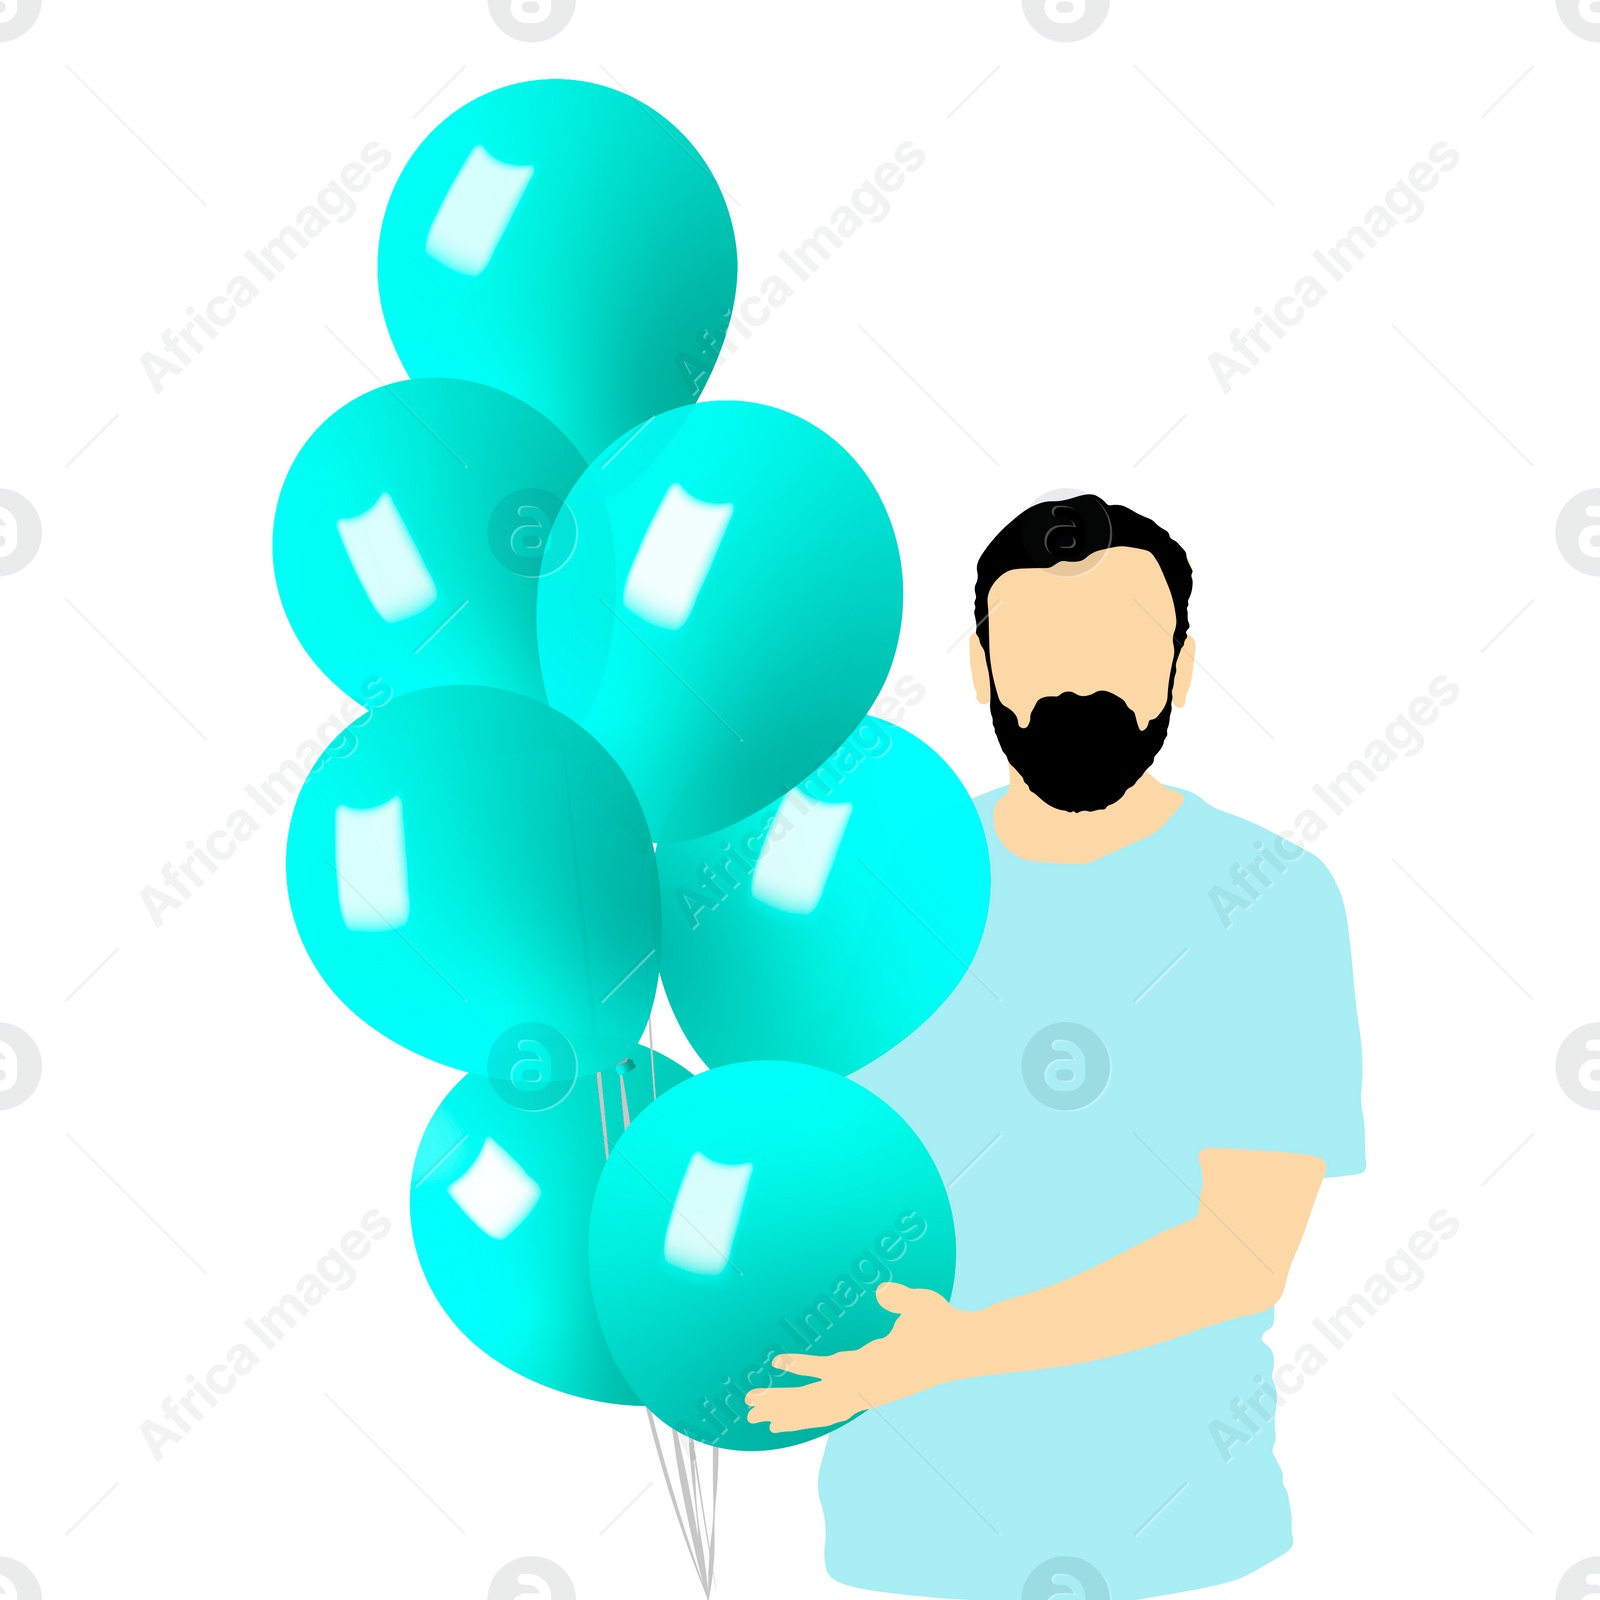 Illustration of Man with air balloons on white background